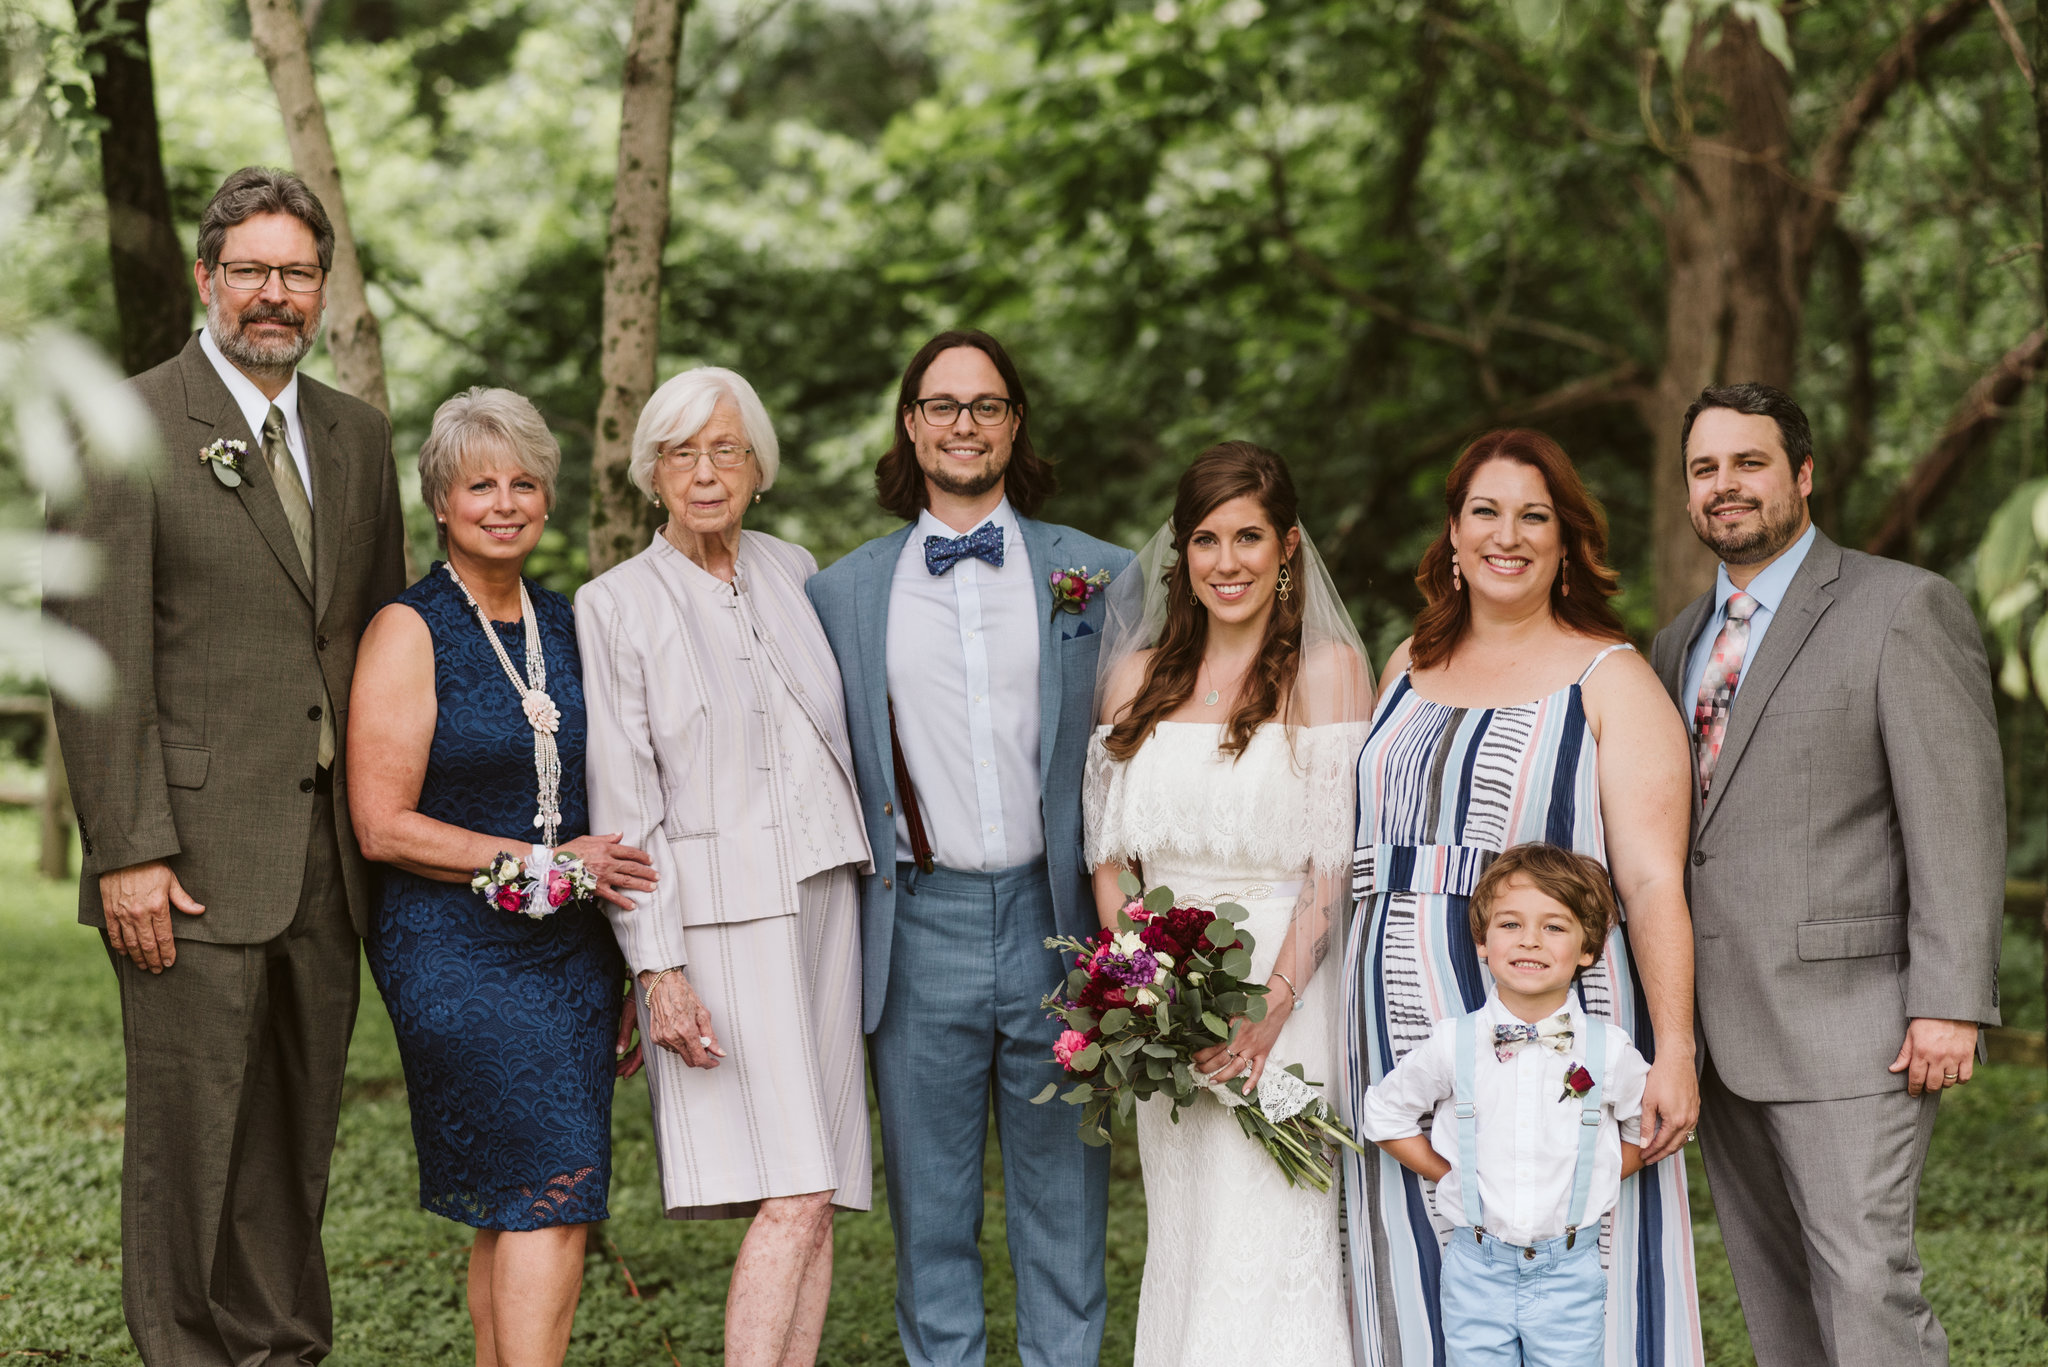  Annapolis, Quaker Wedding, Baltimore Wedding Photographer, Intimate, Small Wedding, Vintage, DIY, Bride and groom with Family, Family Portrait 